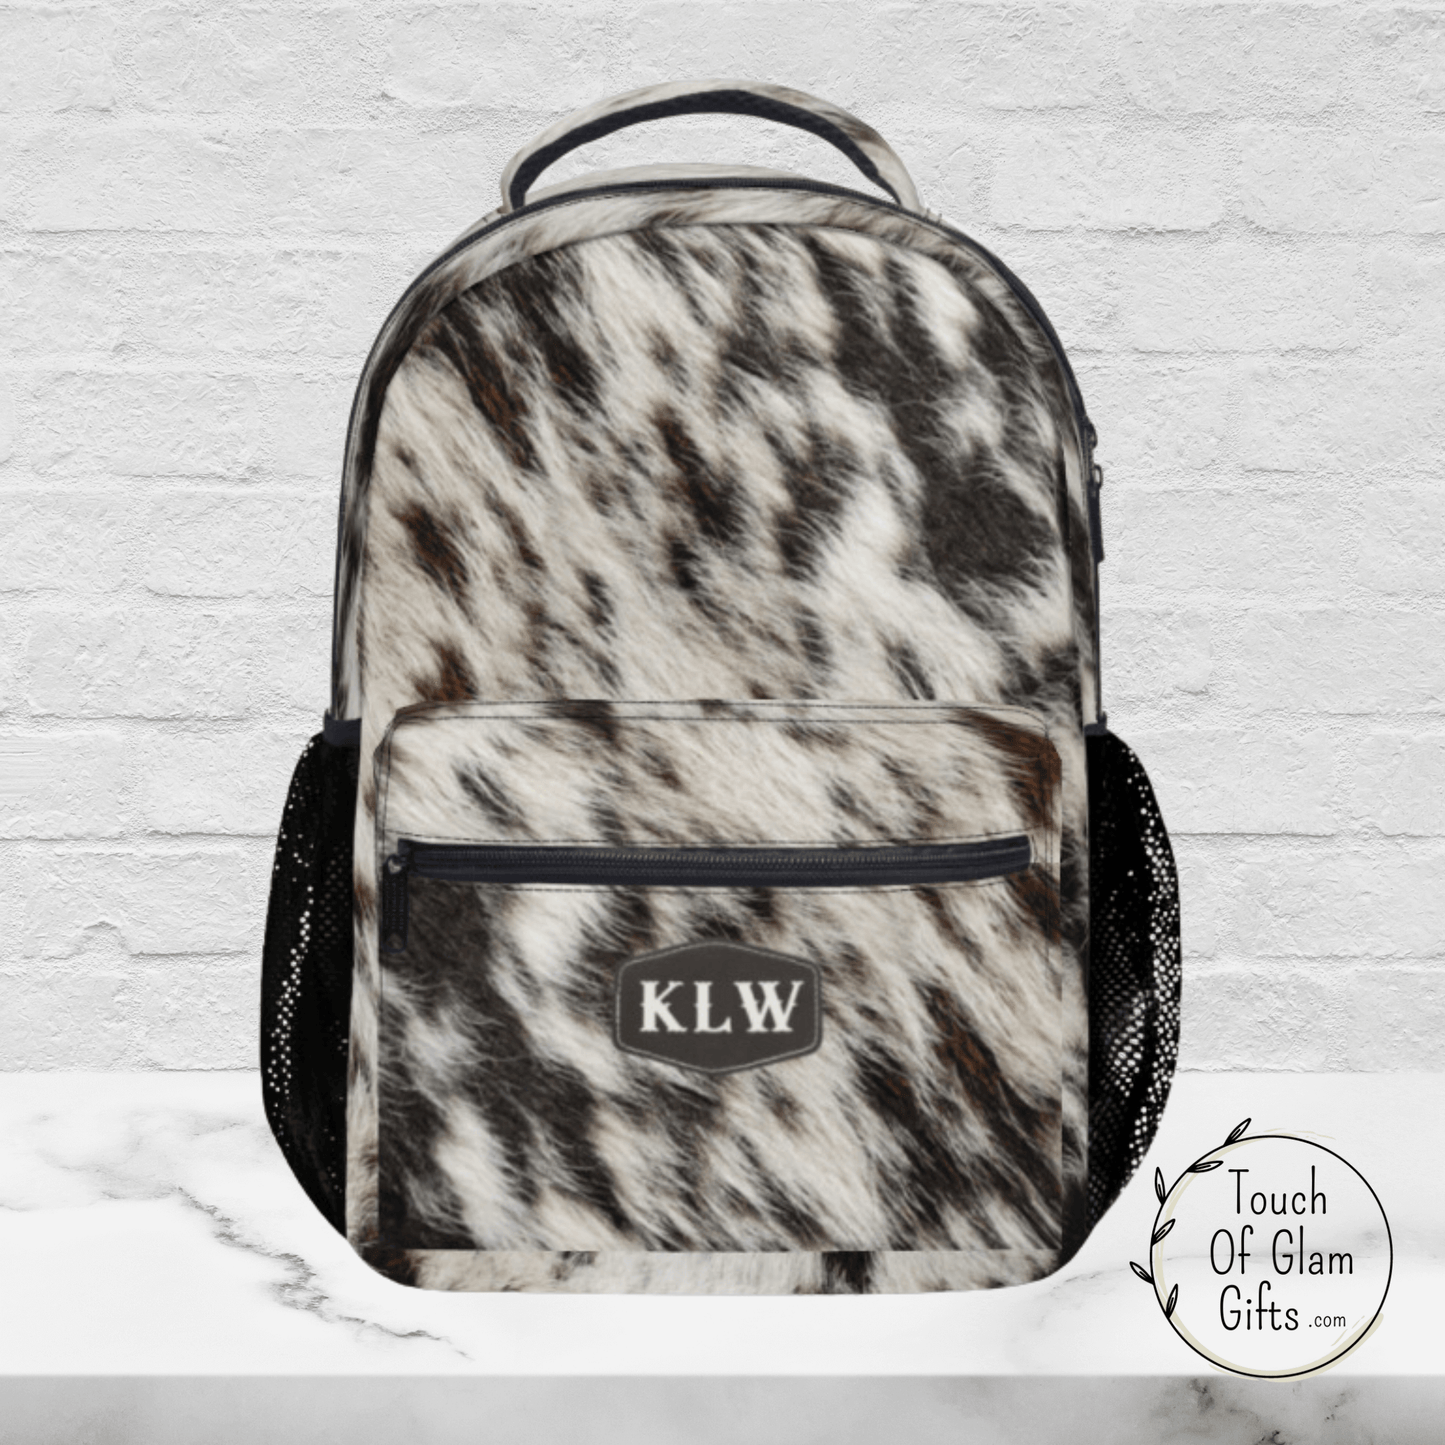 Our monogrammed cow print backpack.